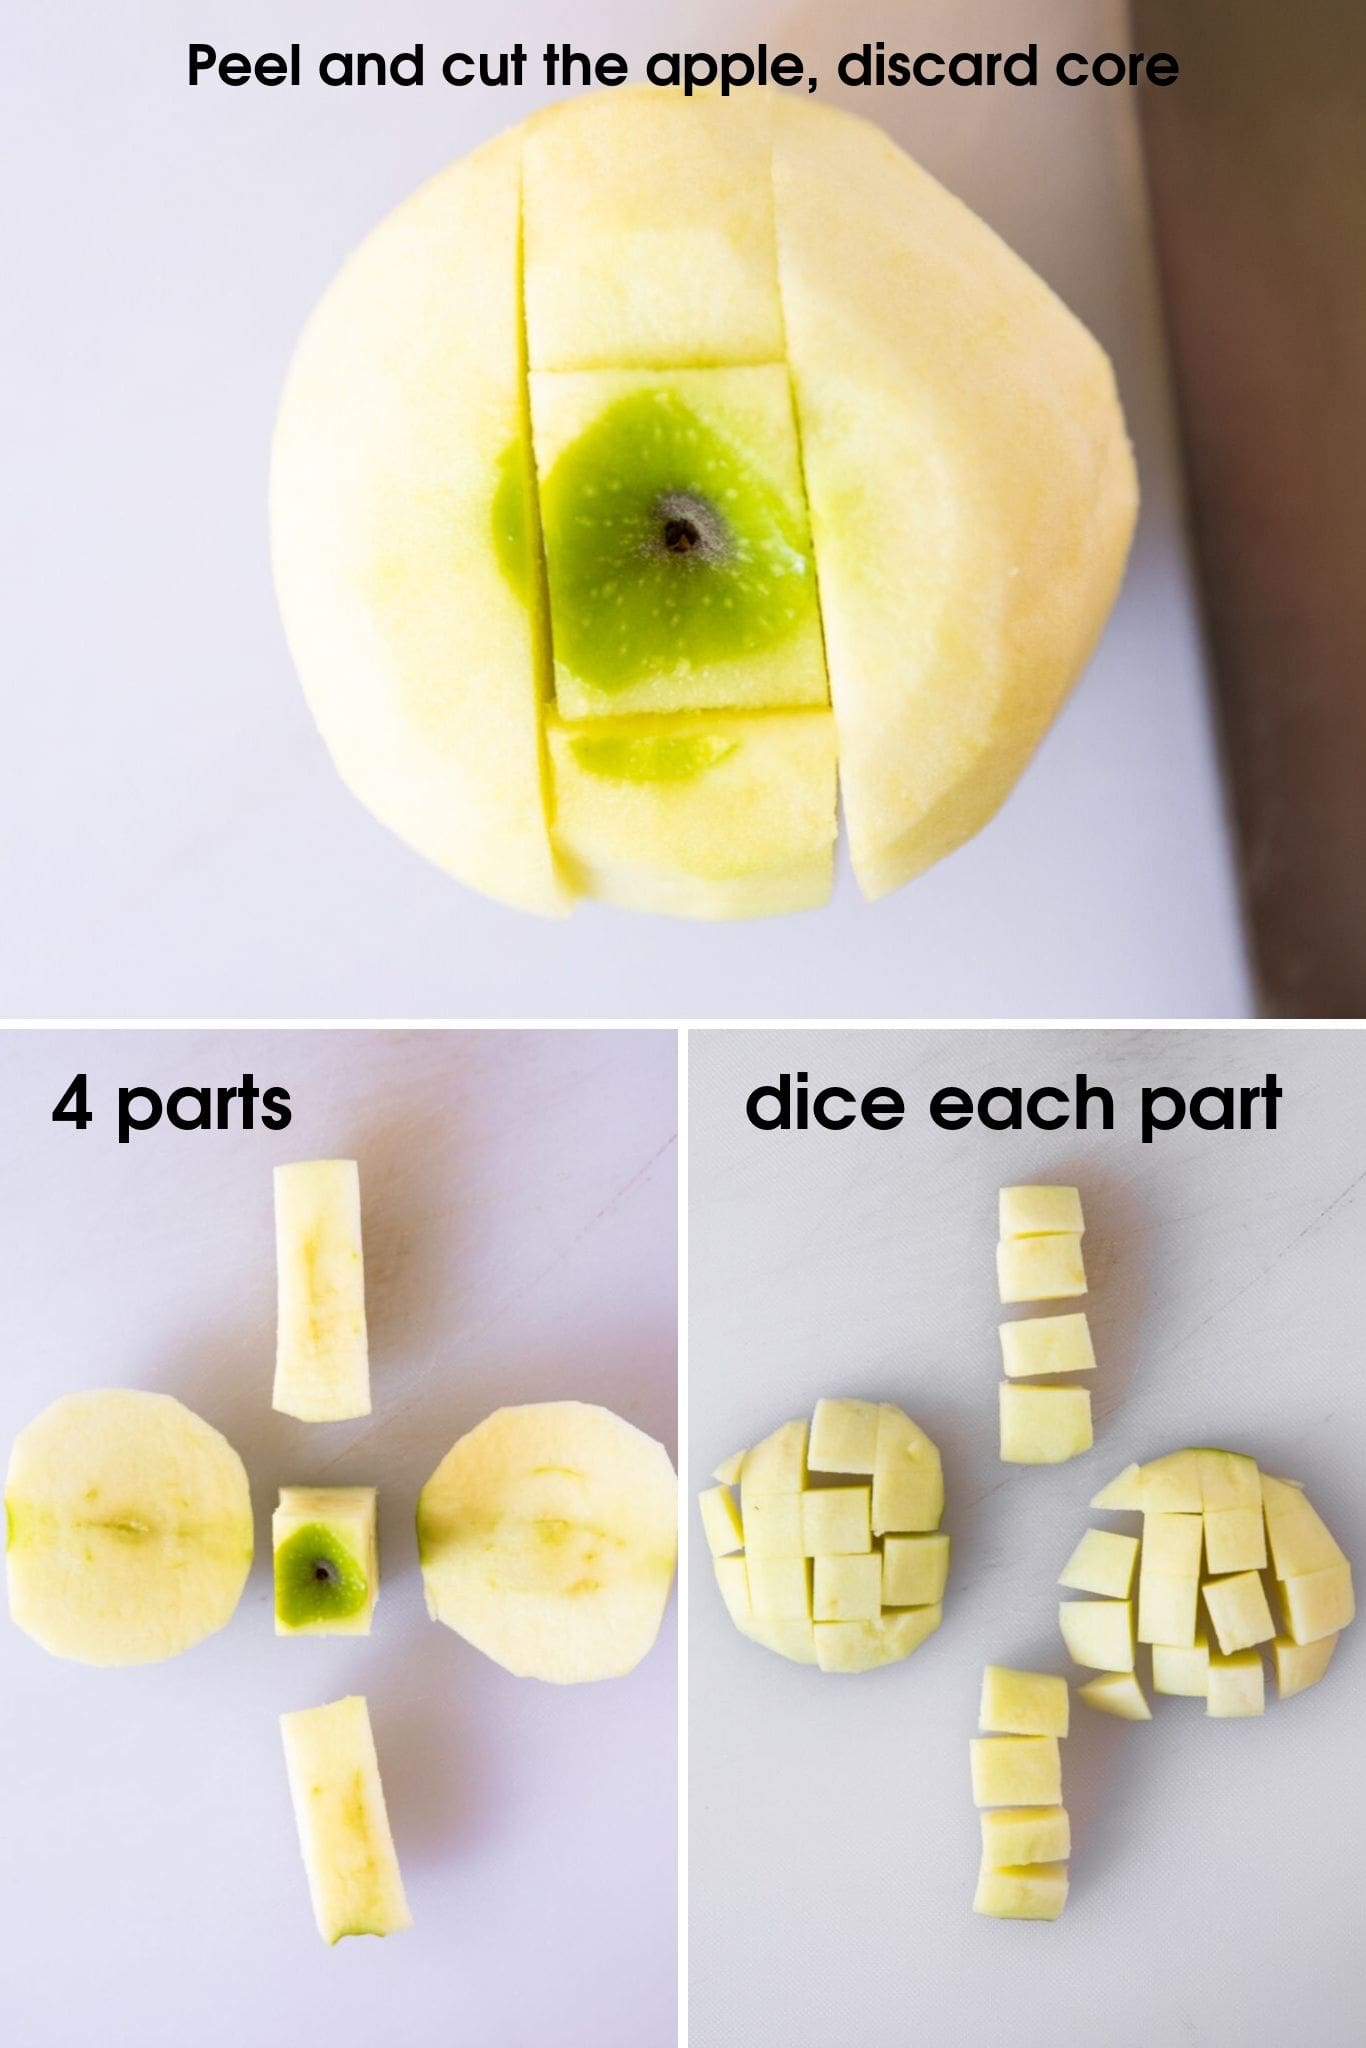 photos showing how to core and dice a peeled apple